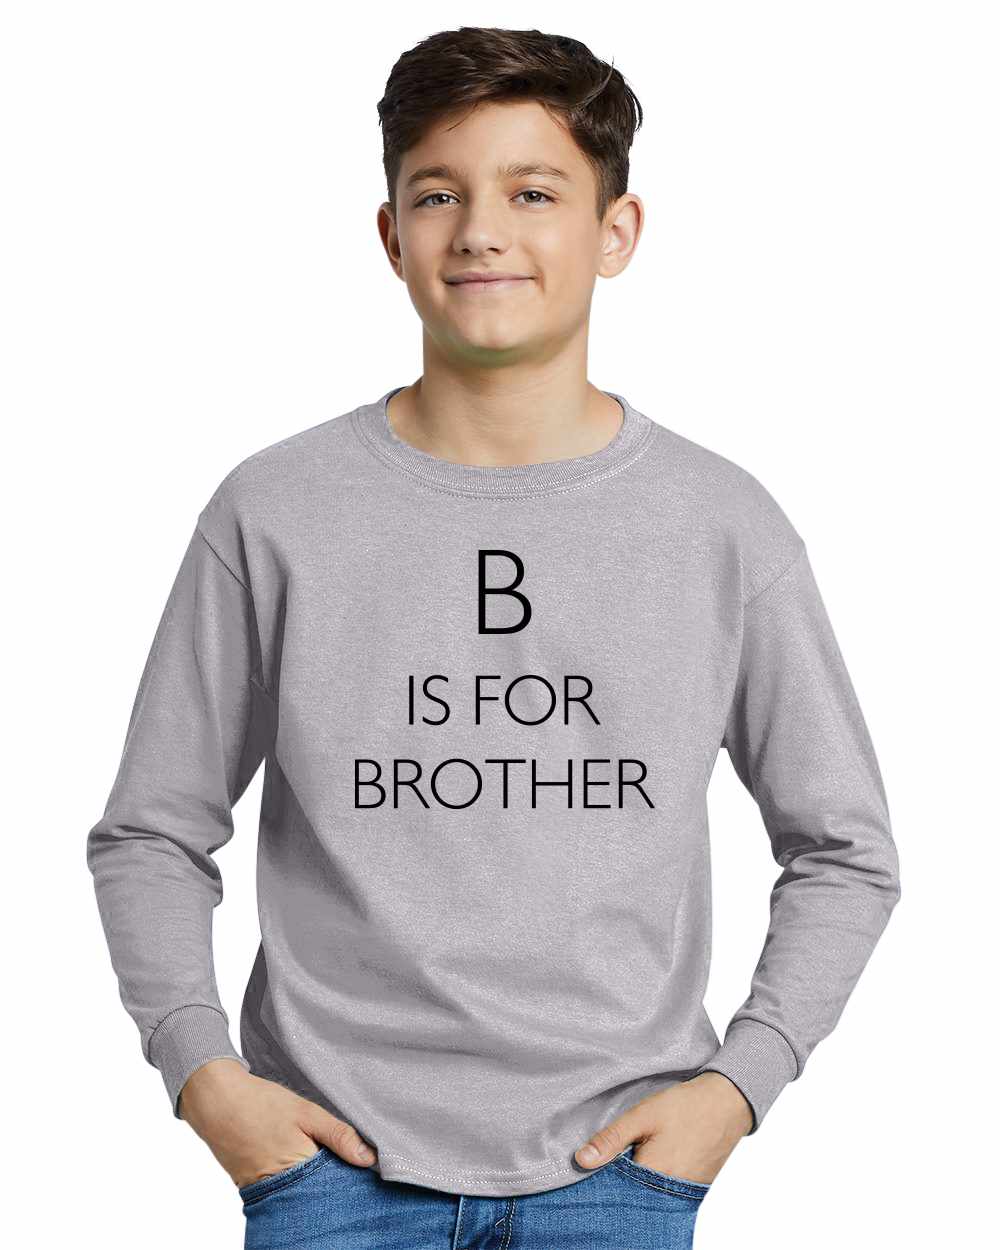 B is for Brother on Youth Long Sleeve Shirt (#1009-203)